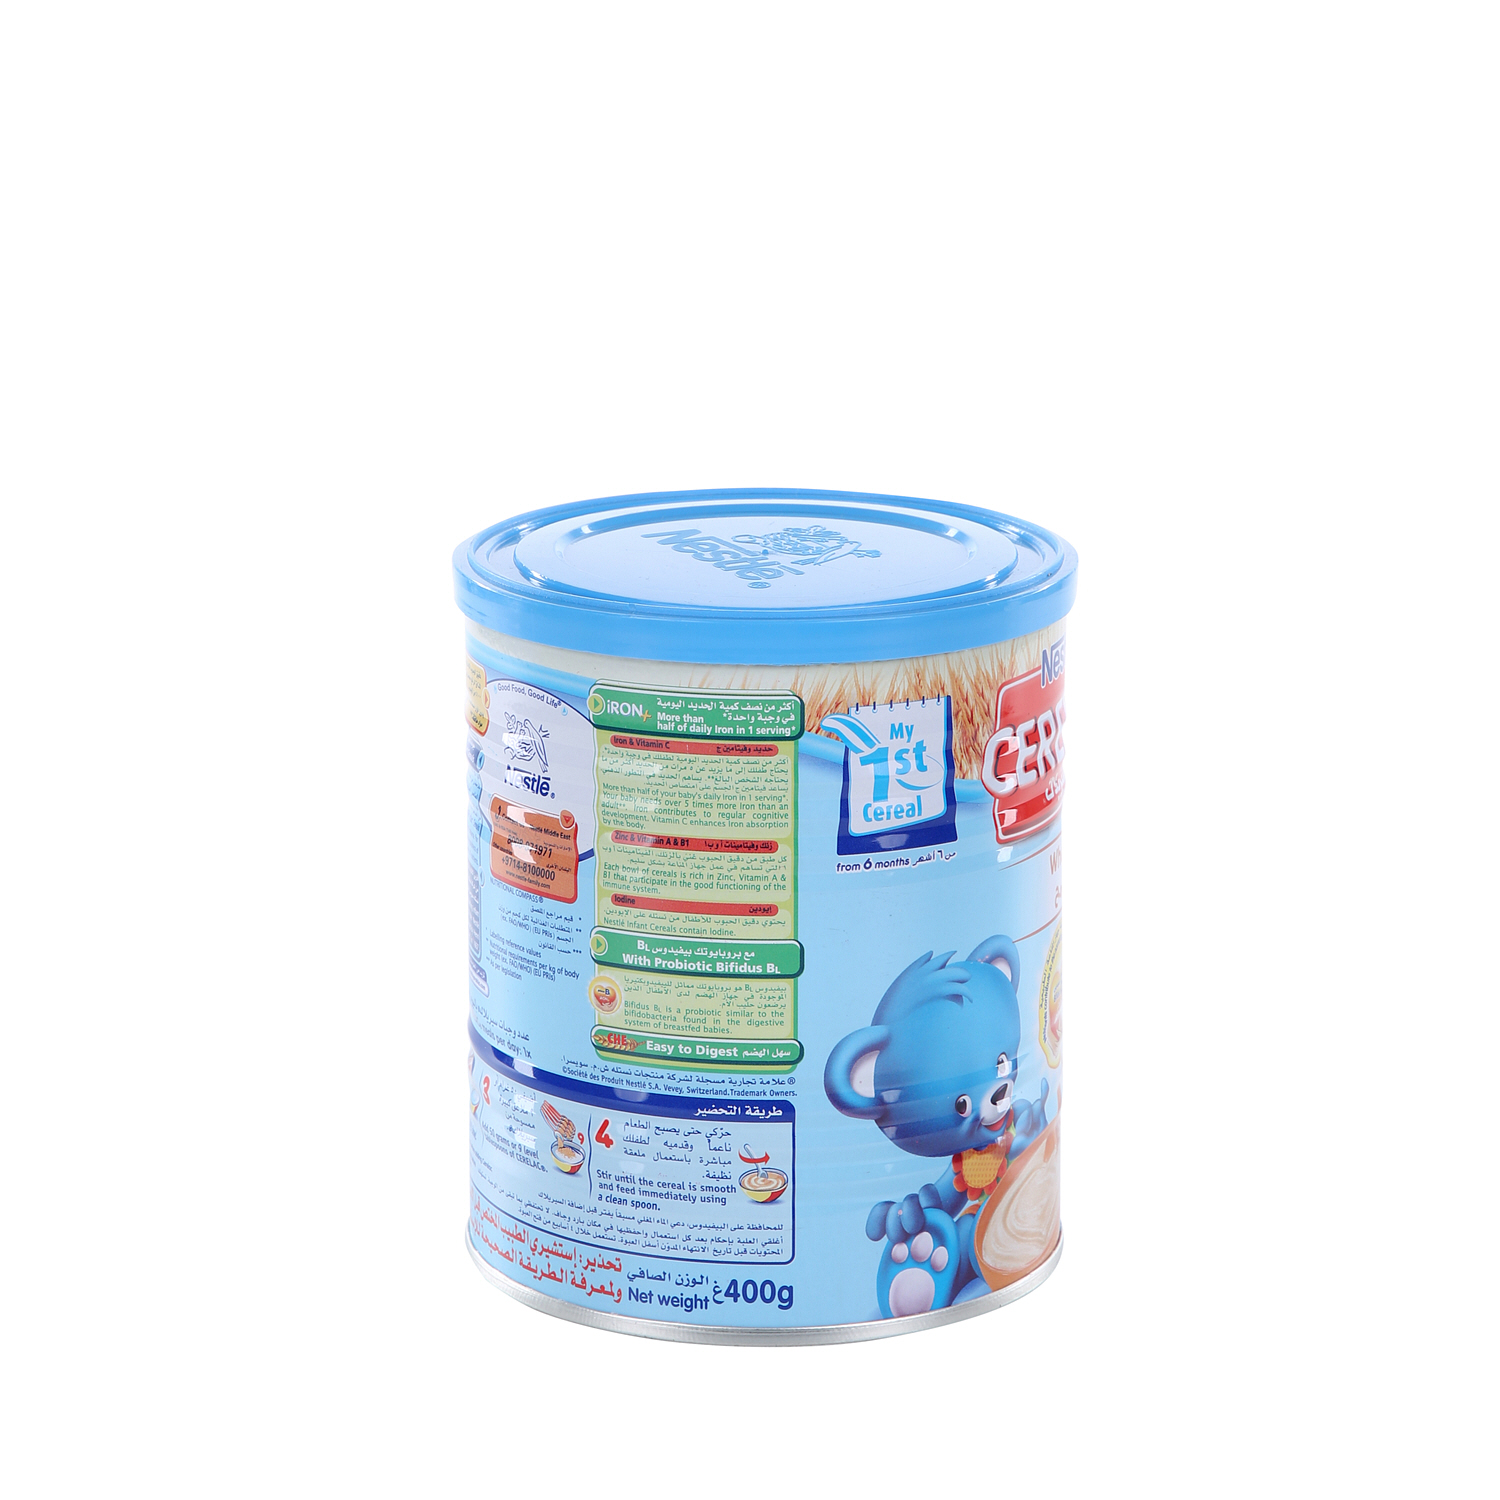 Nestle Cerelac Baby Food Wheat 400 g